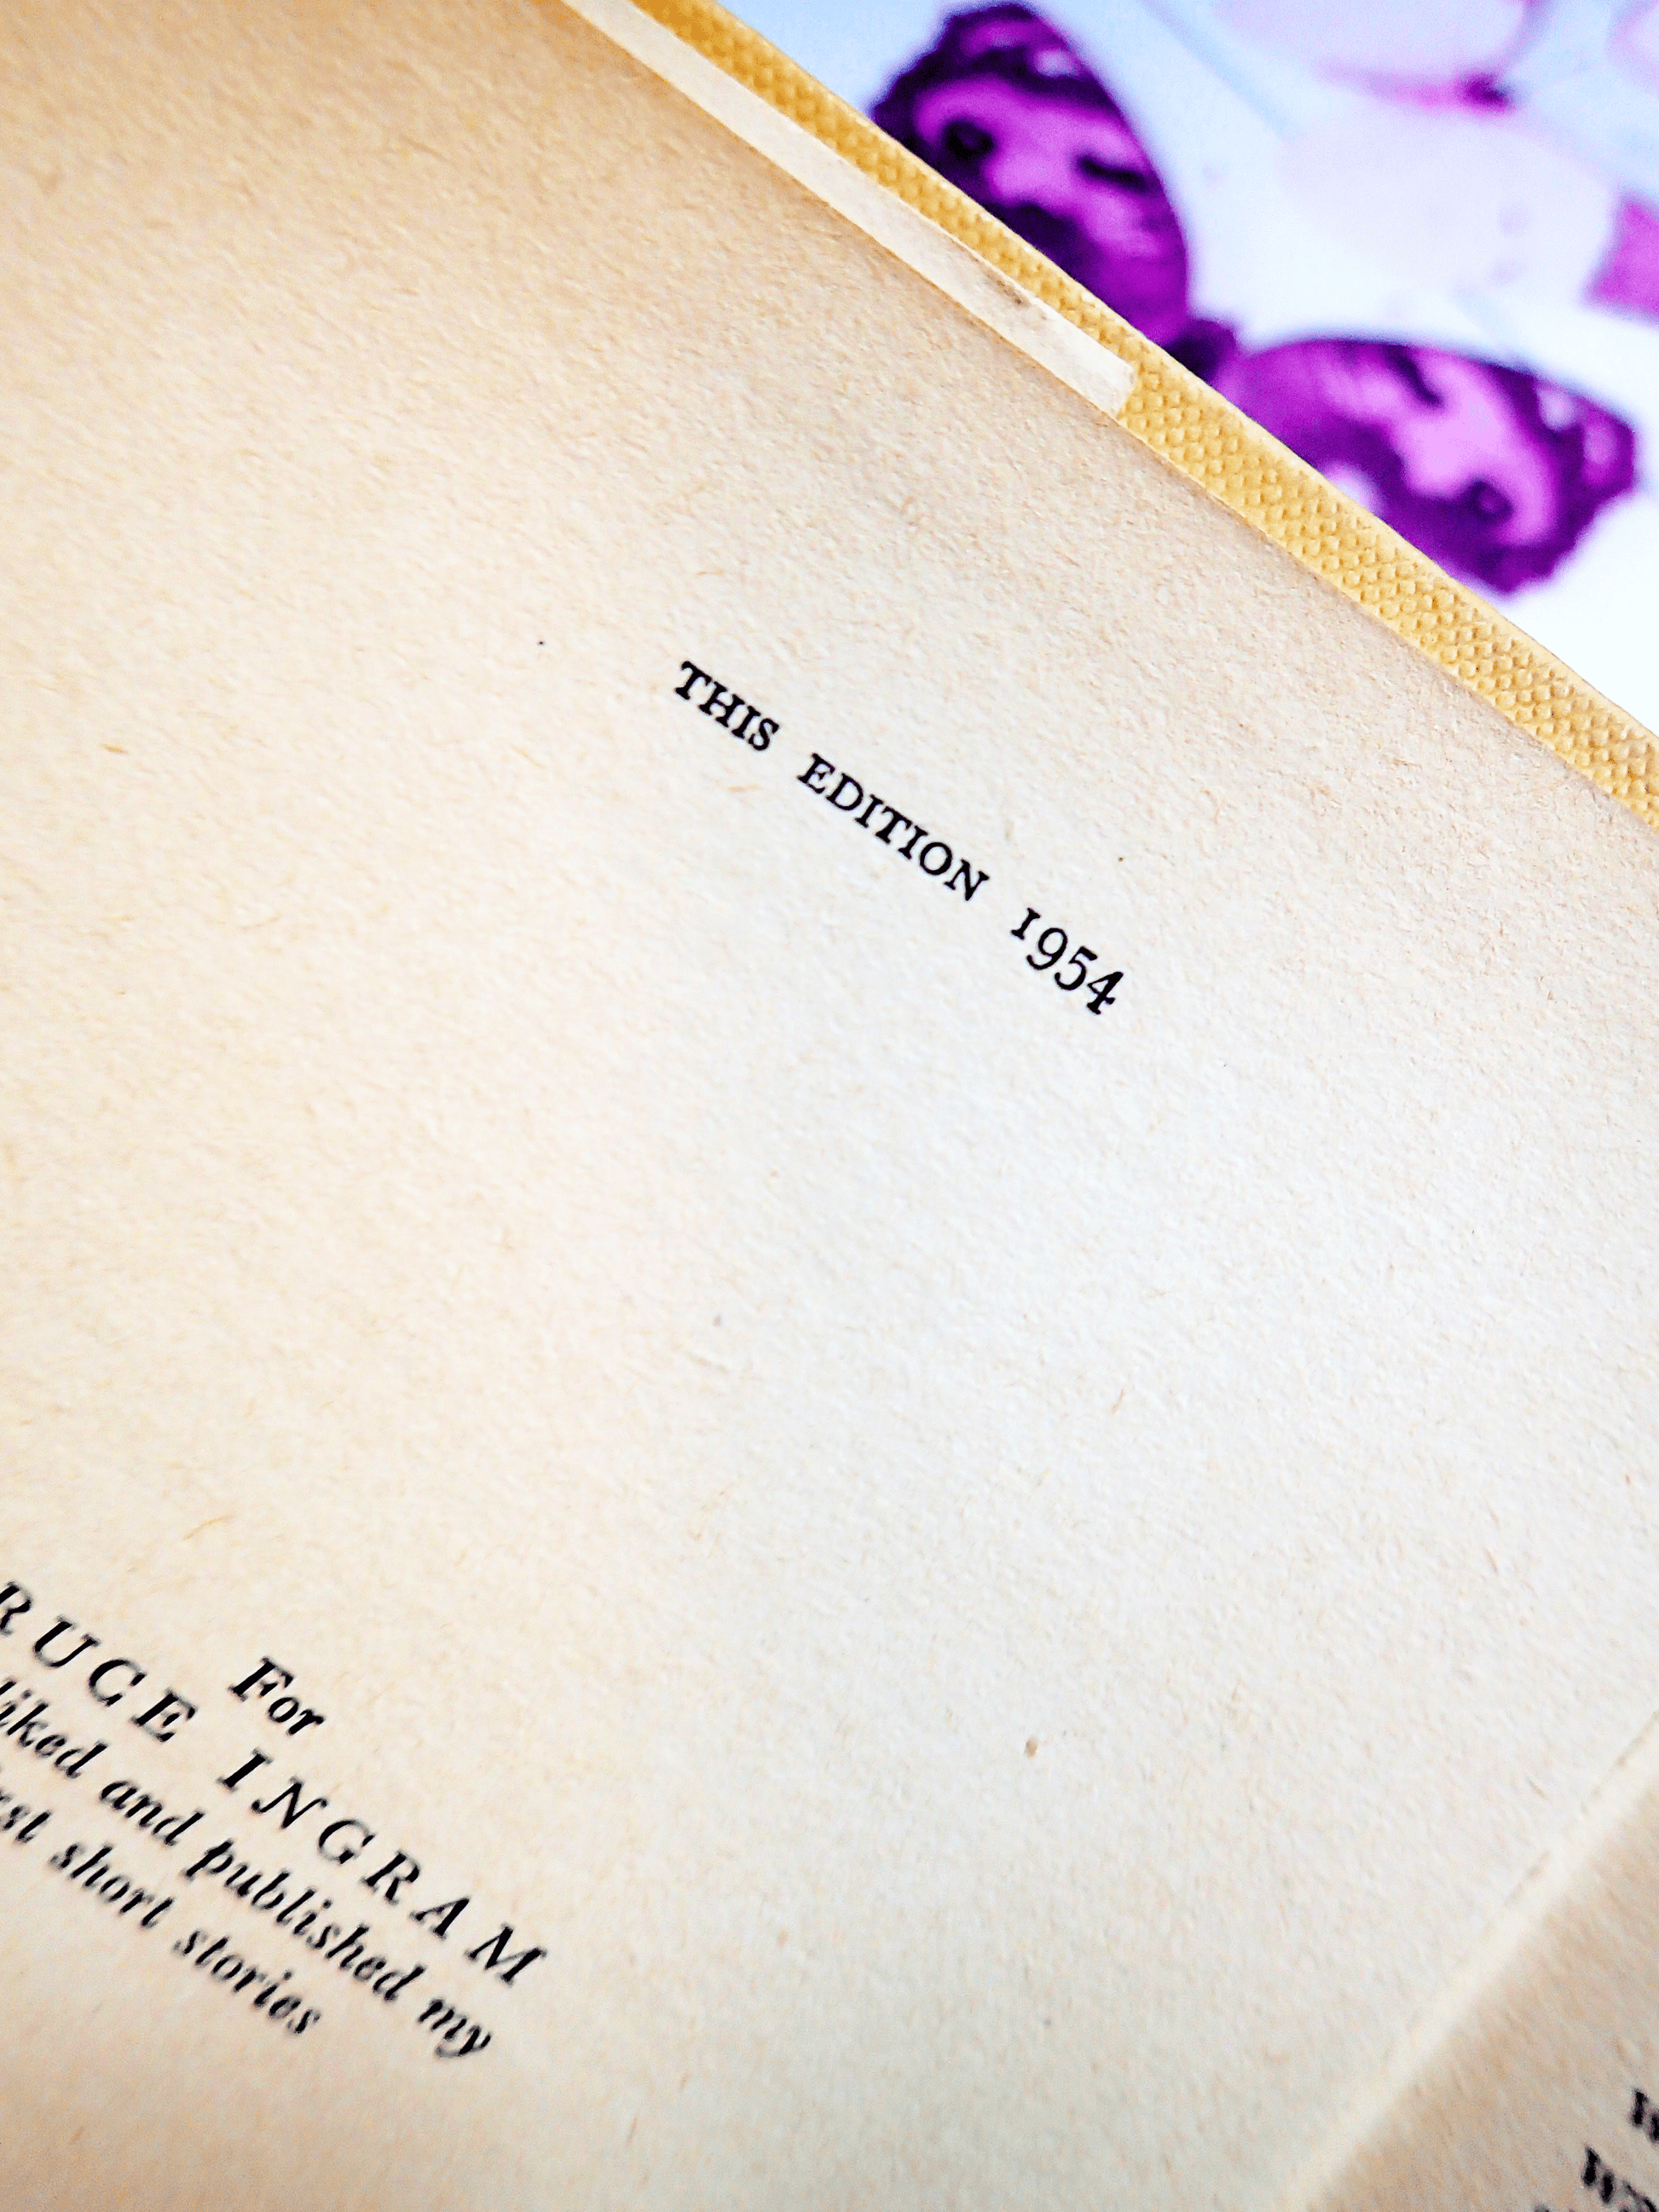 Page showing Publication details of A Pocketful of Rye Agatha Christie Vintage Thriller Book Club 'This Edition 1954'.